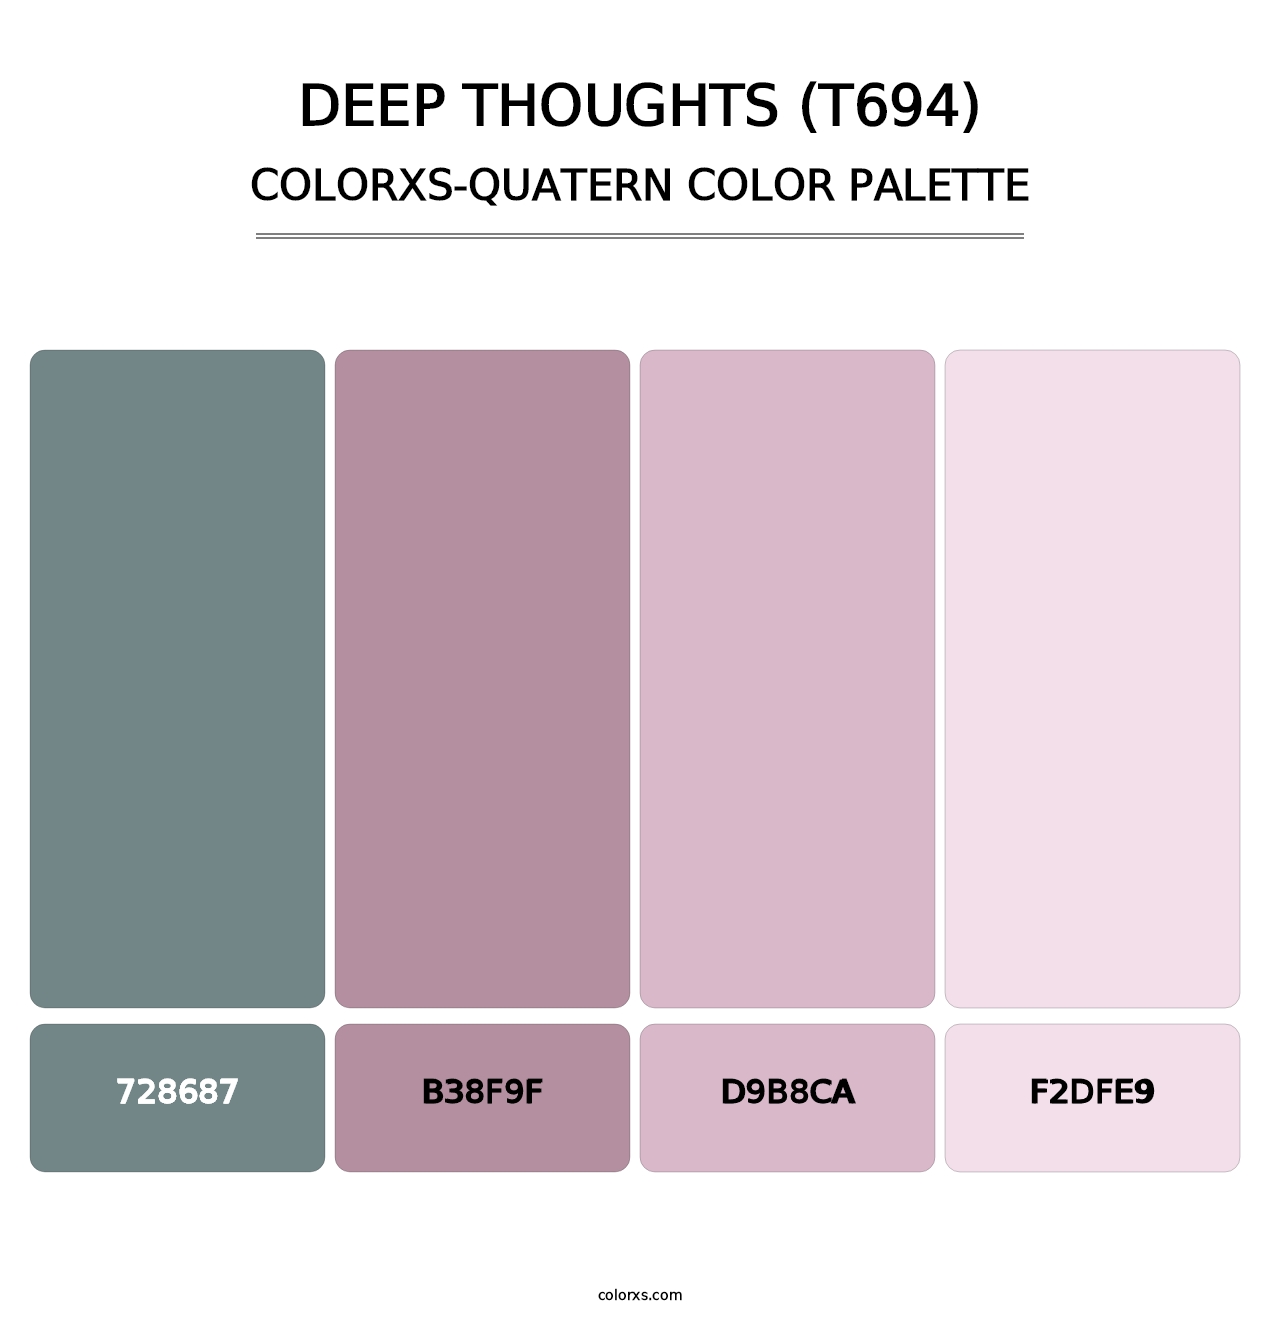 Deep Thoughts (T694) - Colorxs Quatern Palette